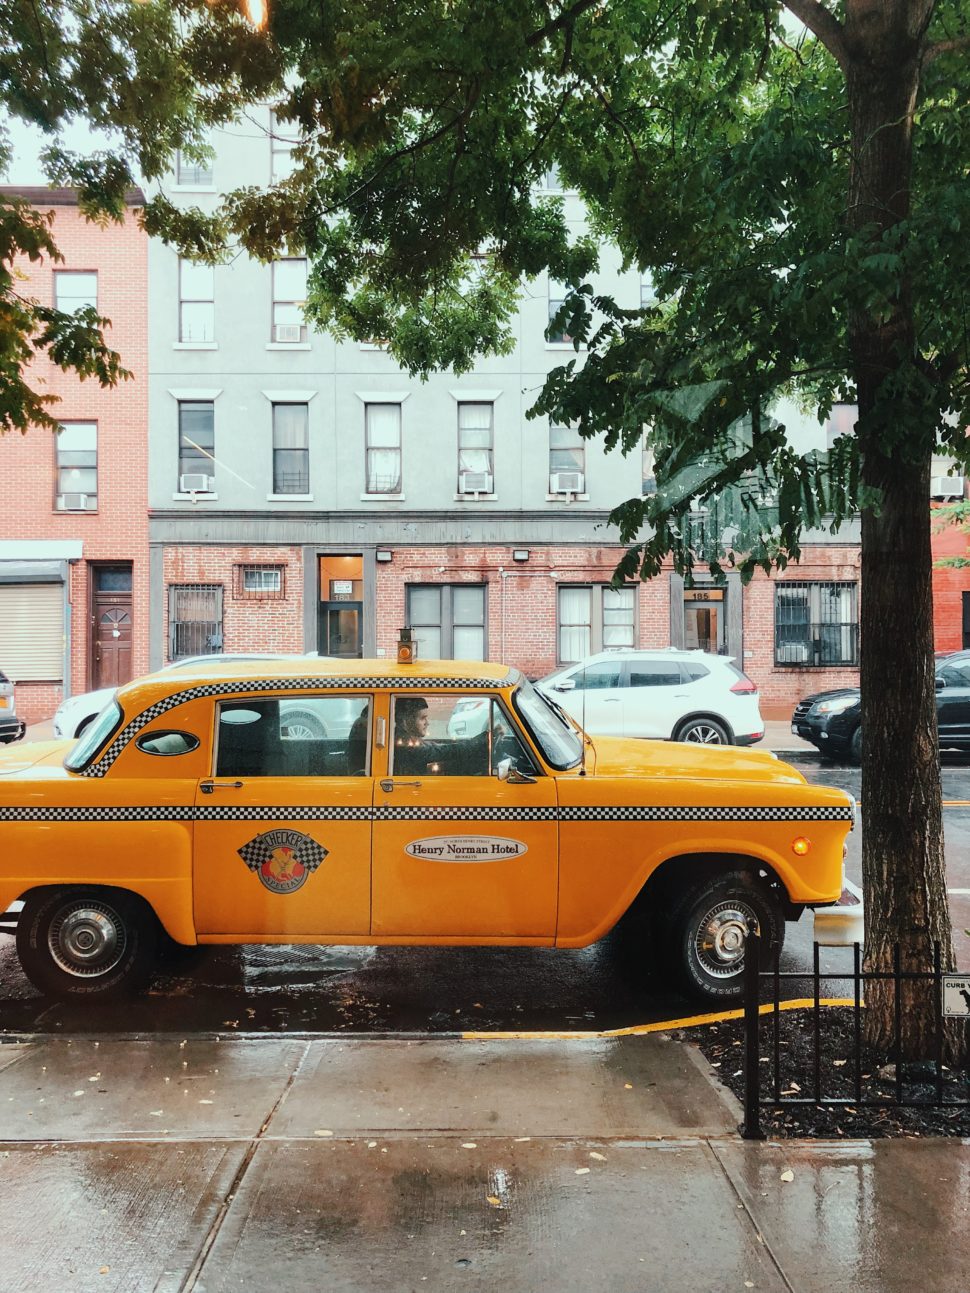 Henry Norman Hotel Signature Vintage Yellow Cab.